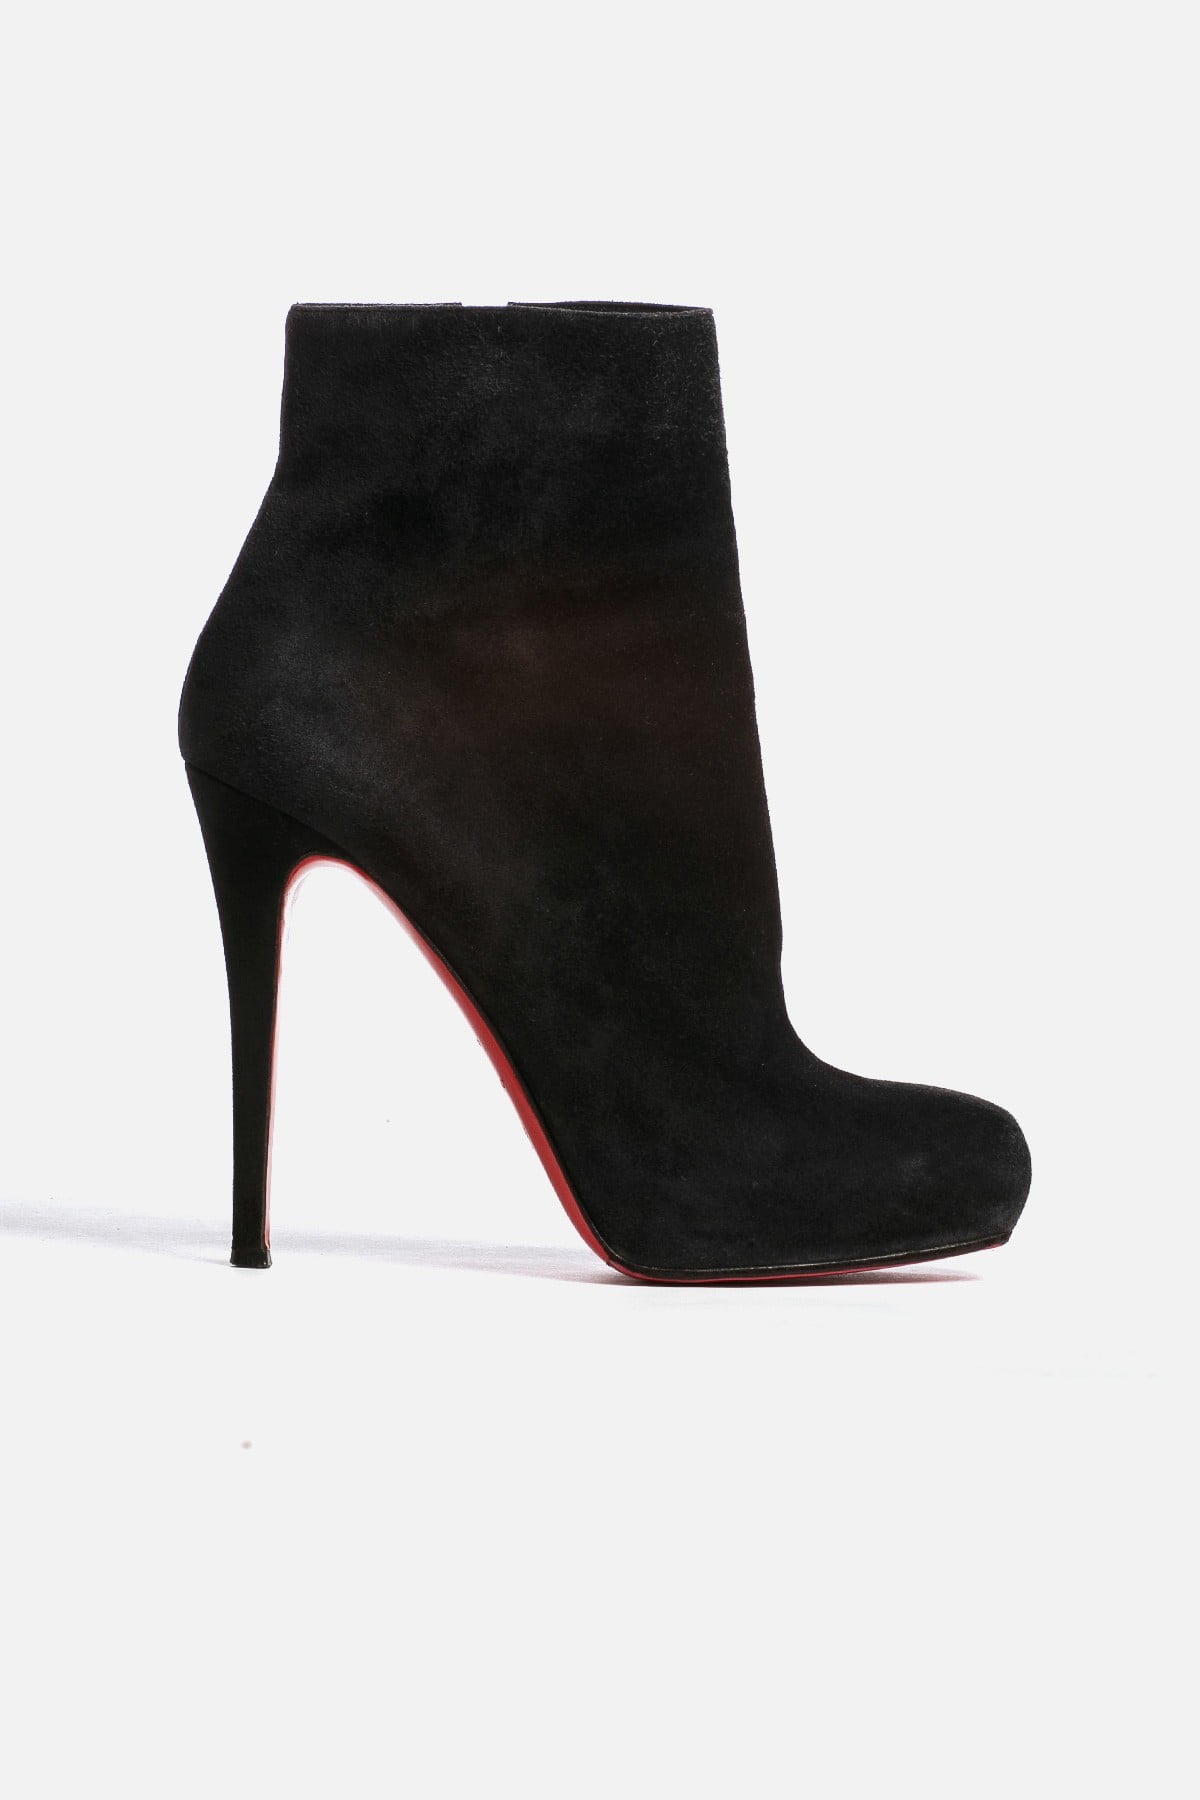 christian louboutin suede ankle boots